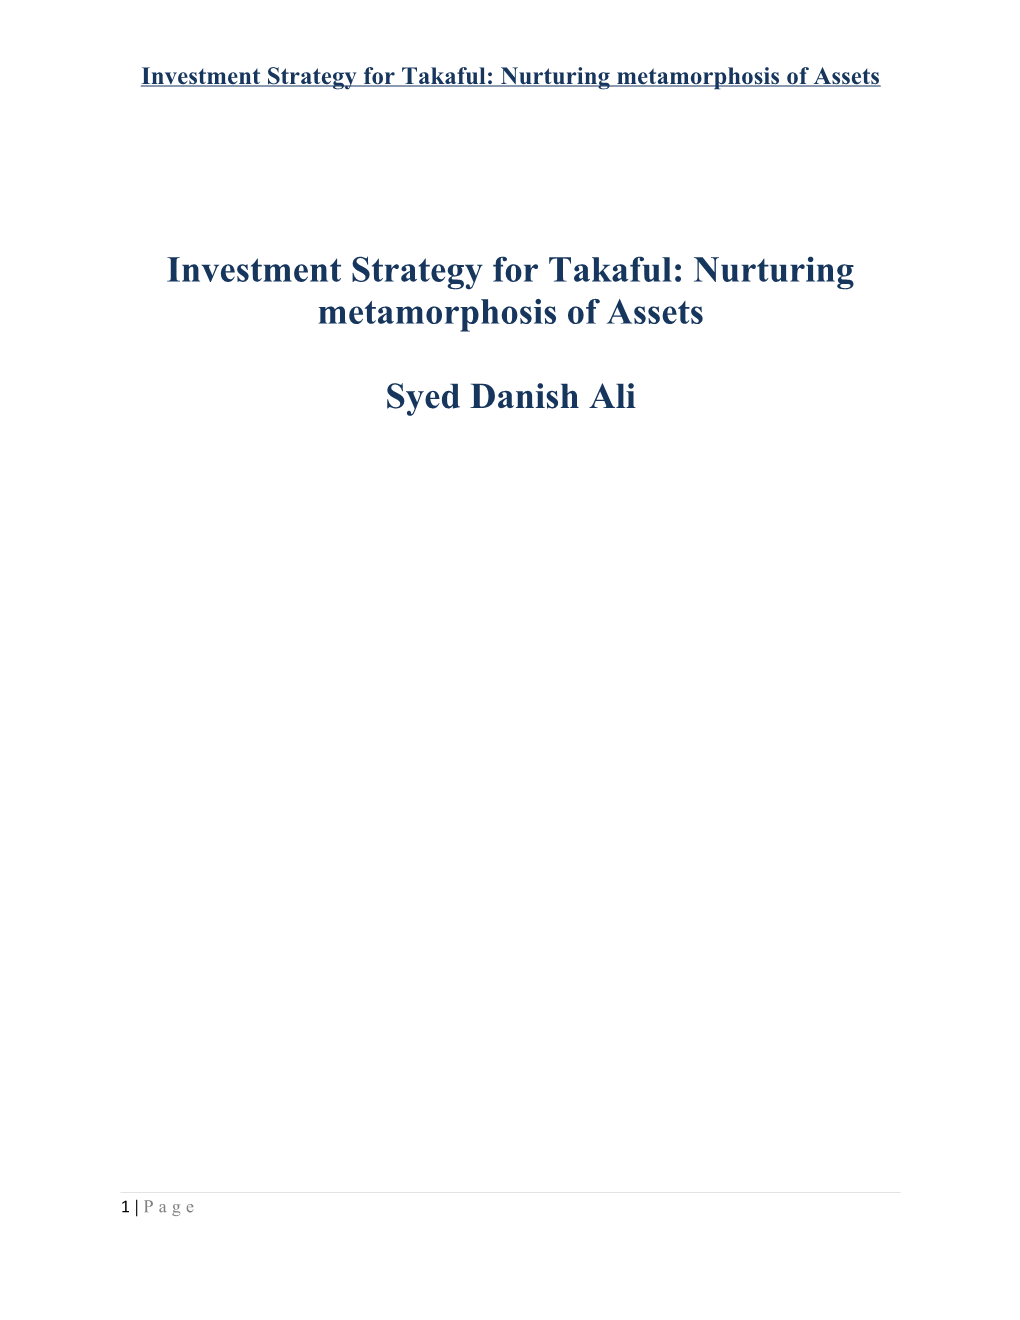 Investment Strategy for Takaful: Nurturing Metamorphosis of Assets